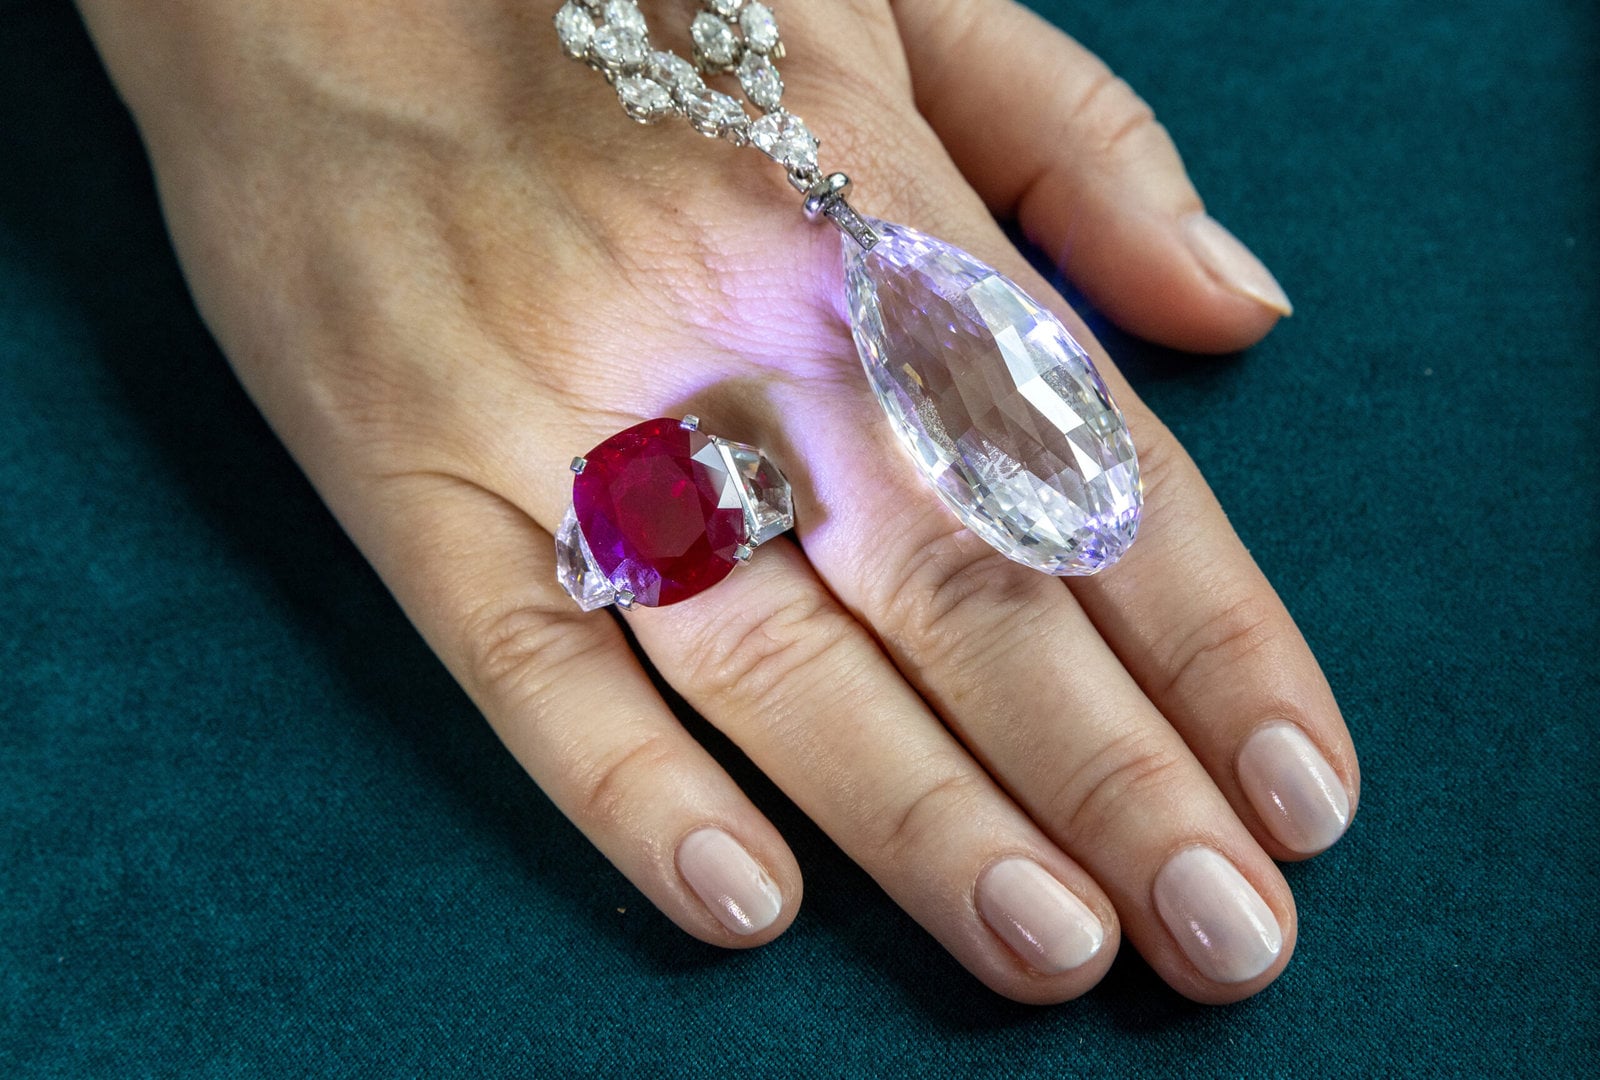 Sunrise Ruby and Diamond ring of 25 carats by Cartier and a 90 carat Briolette of India Diamond Necklace by Harry Winston, are seen during a preview of the 700-piece jewellery collection of the late Austrian billionaire Heidi Horten at Christie's before the auction sale in Geneva, Switzerland, May 8, 2023.  REUTERS/Denis Balibouse - RC27U0AINETP